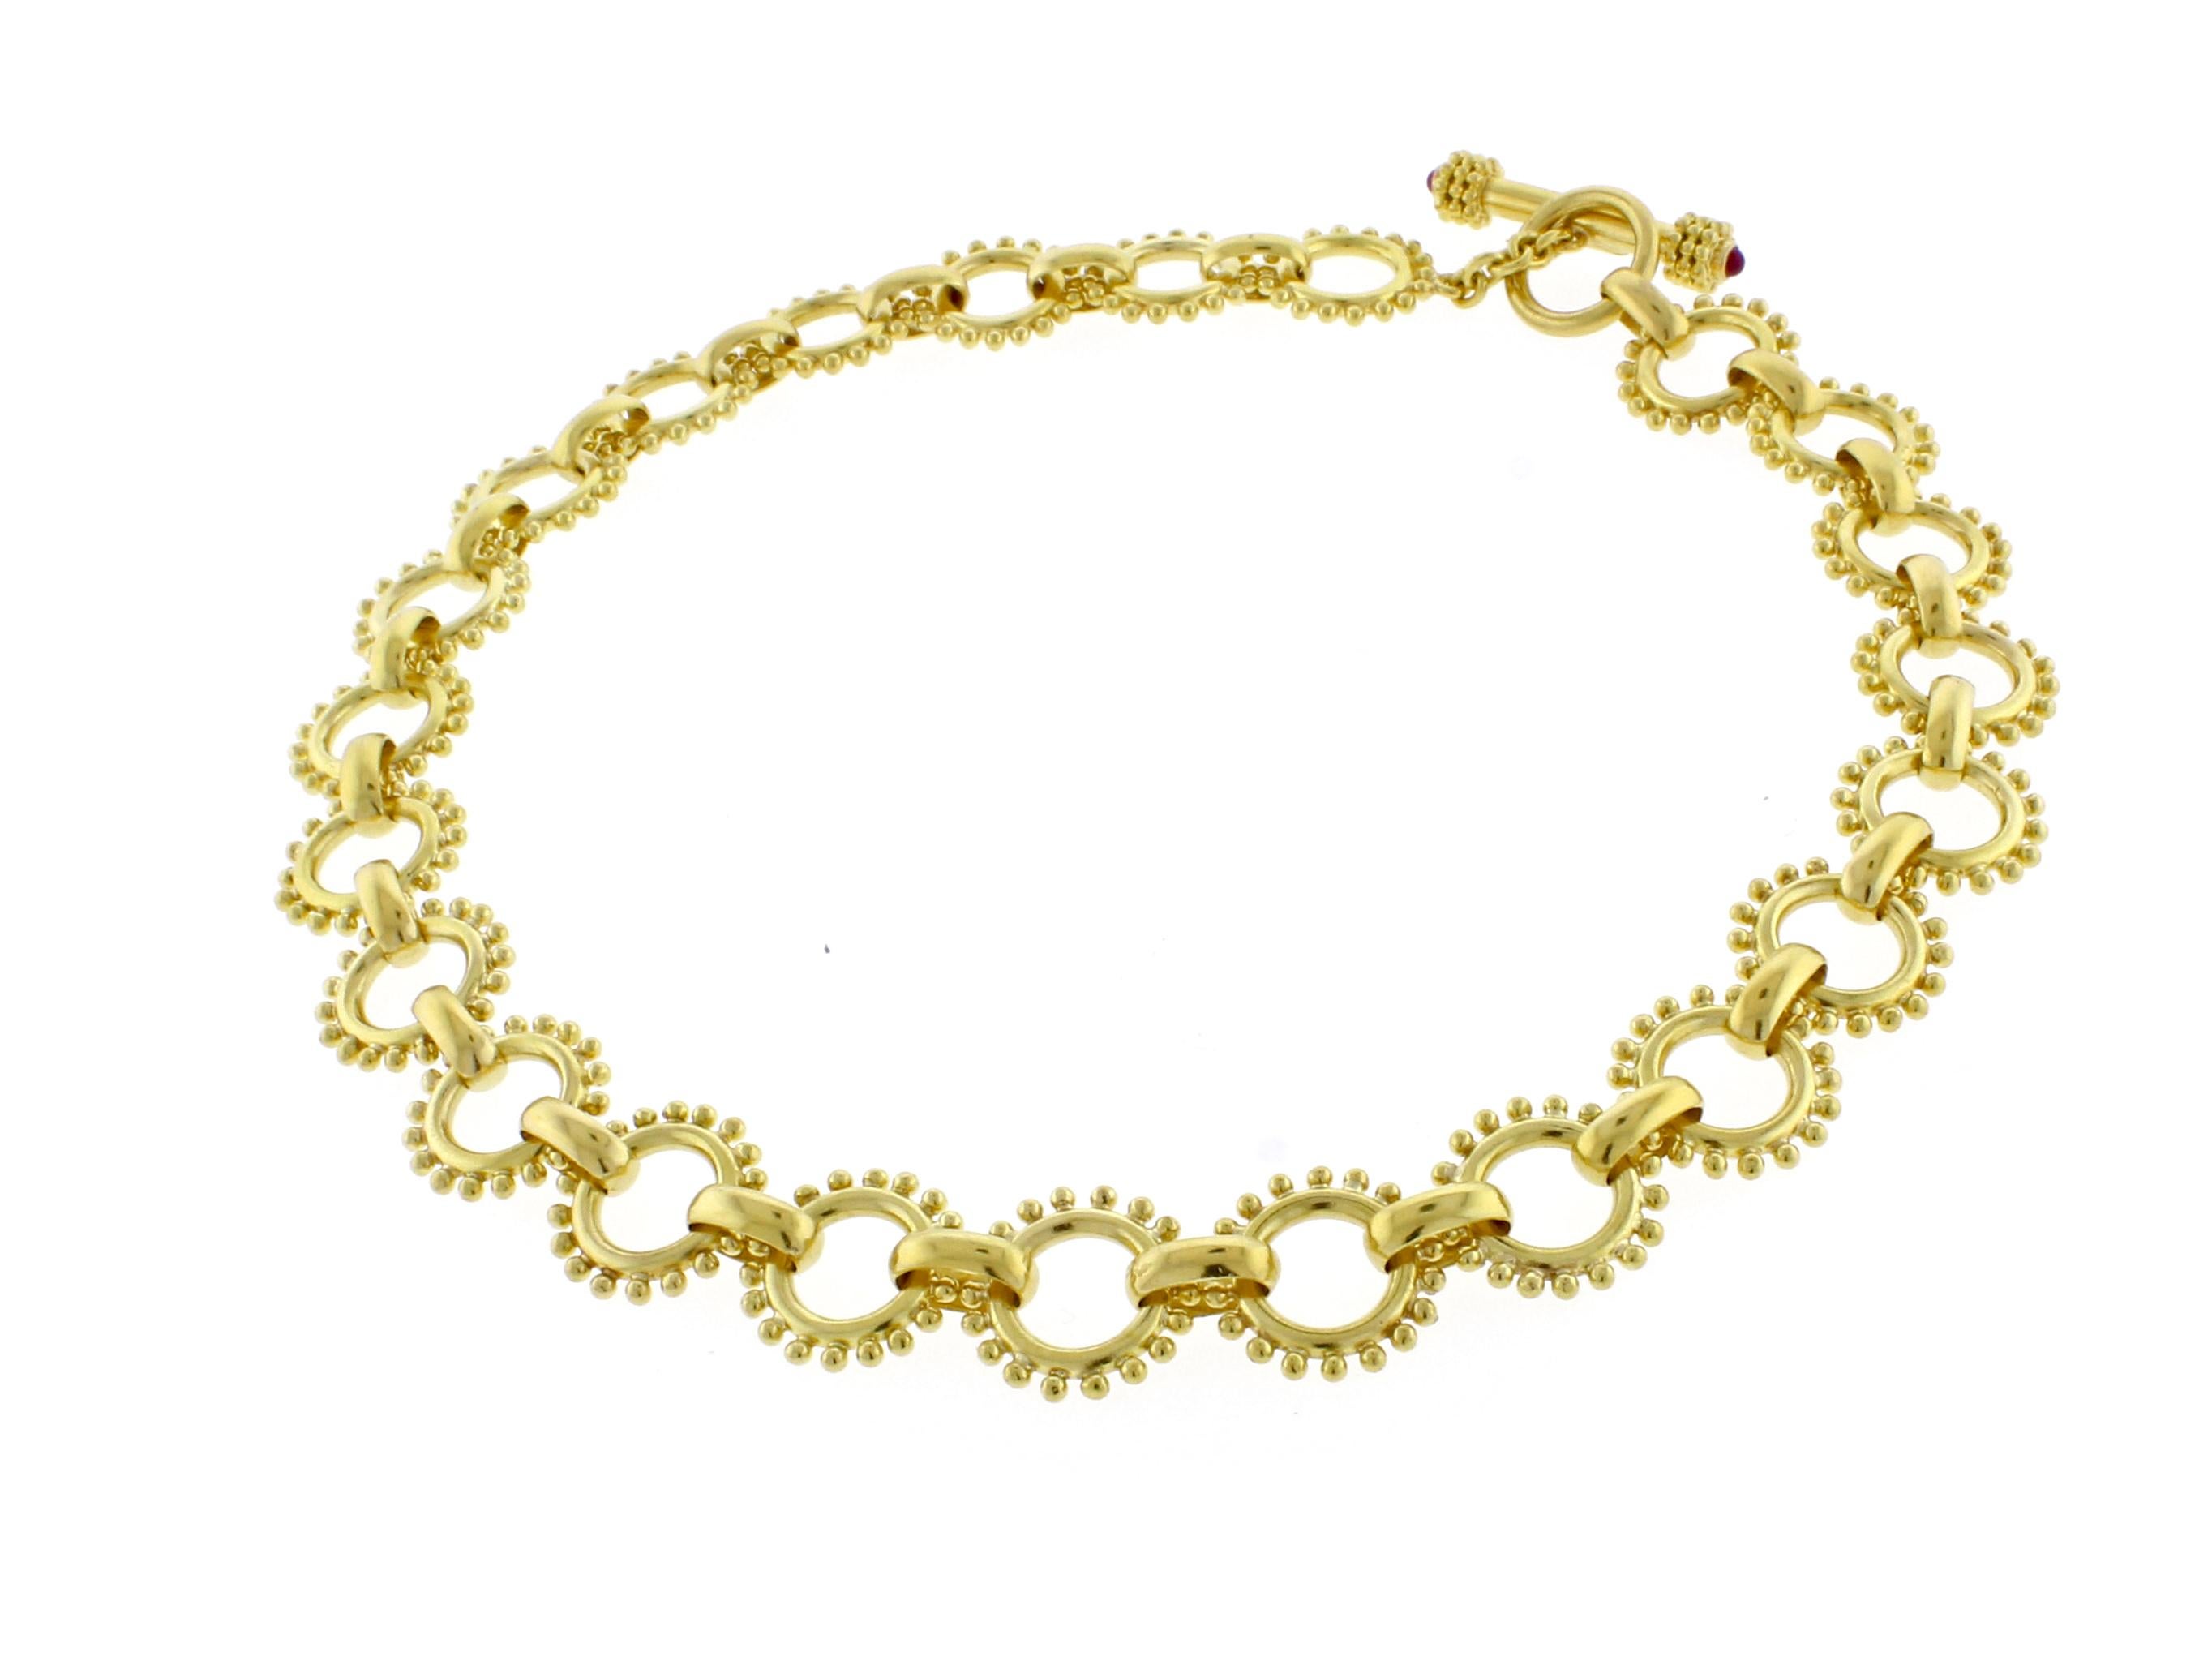 From Elizabeth Locke, a heavy round link toggle 19 karat necklace. The spoked round links measure 18mm, the necklace measures 17 inches. 112.3 grams